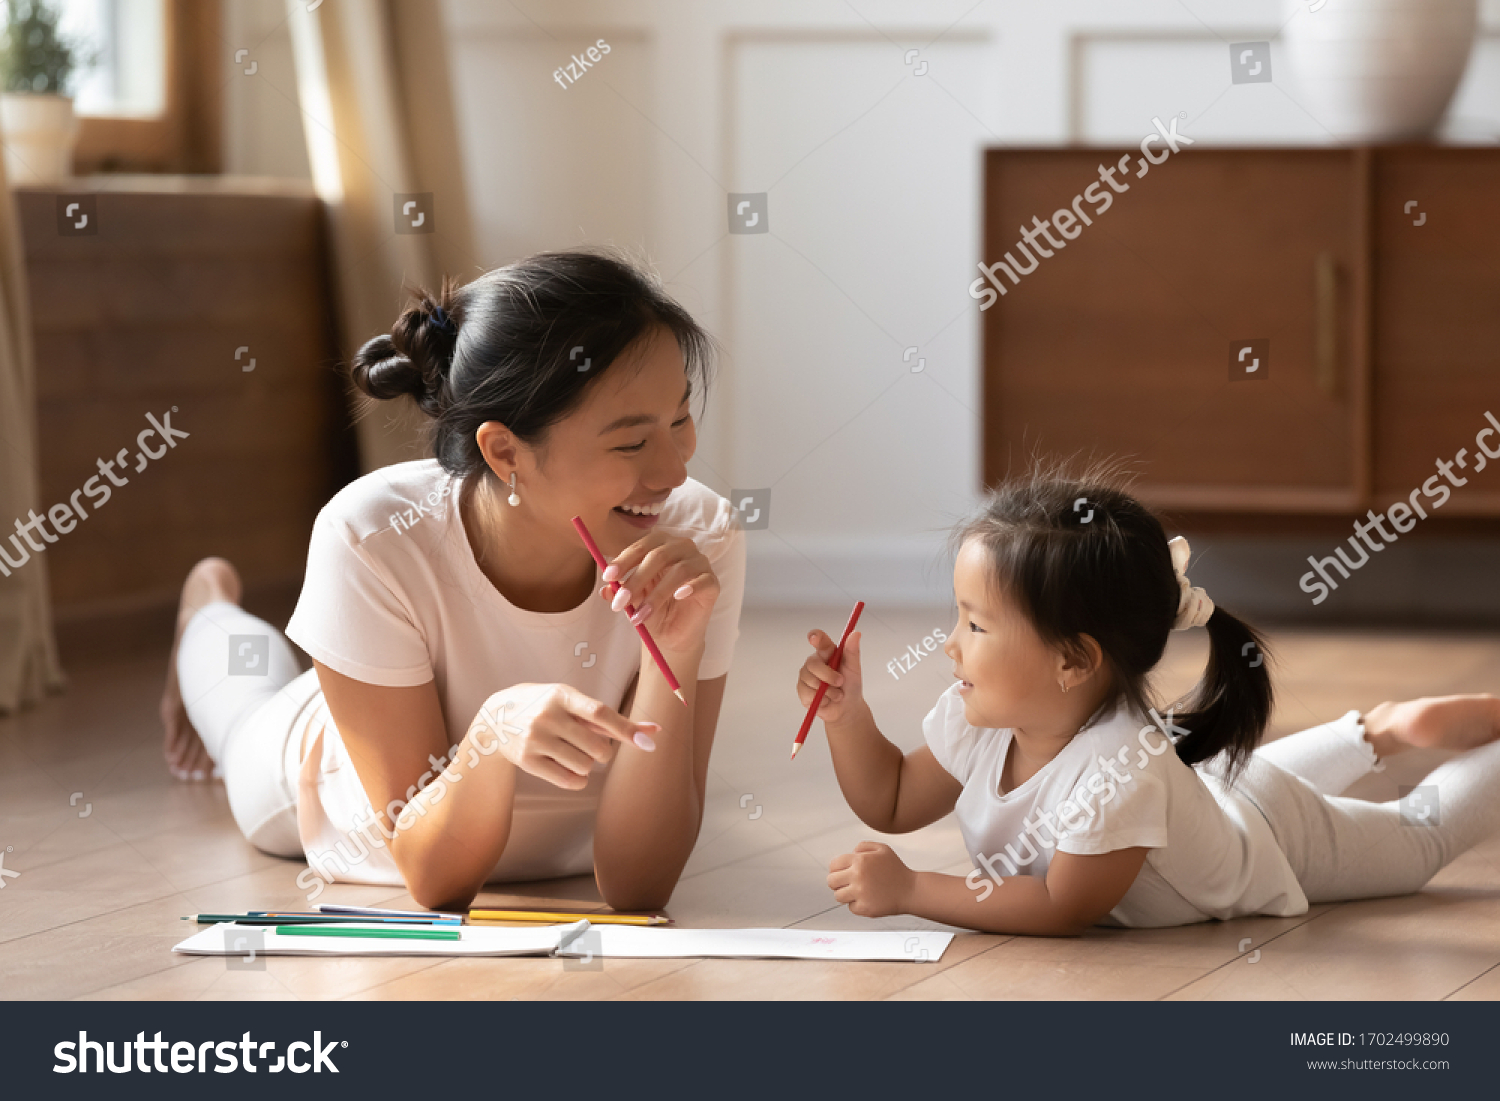 Educational pastime develop creativity skill in kid concept. Asian mother her small daughter lying on warm wooden floor in sunny cozy living room, mom teach girl paint use album and colourful pencils #1702499890